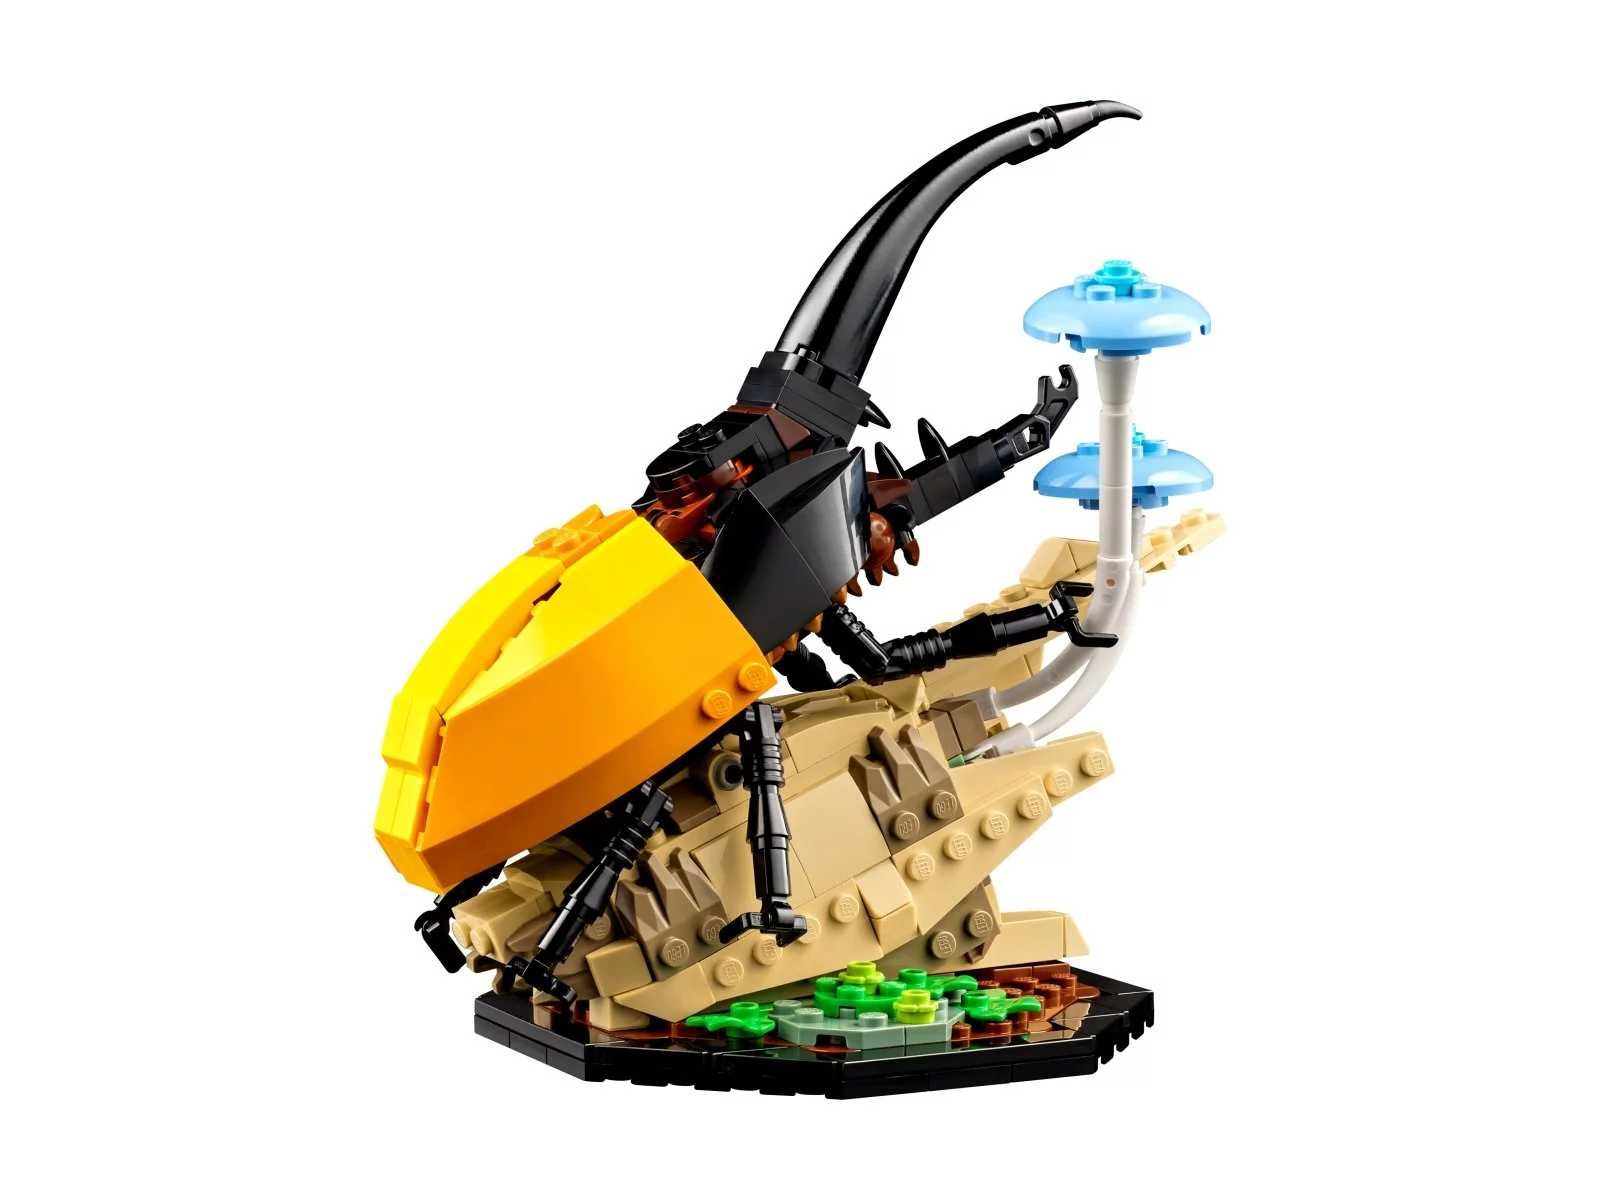 LEGO®The Insect Collection